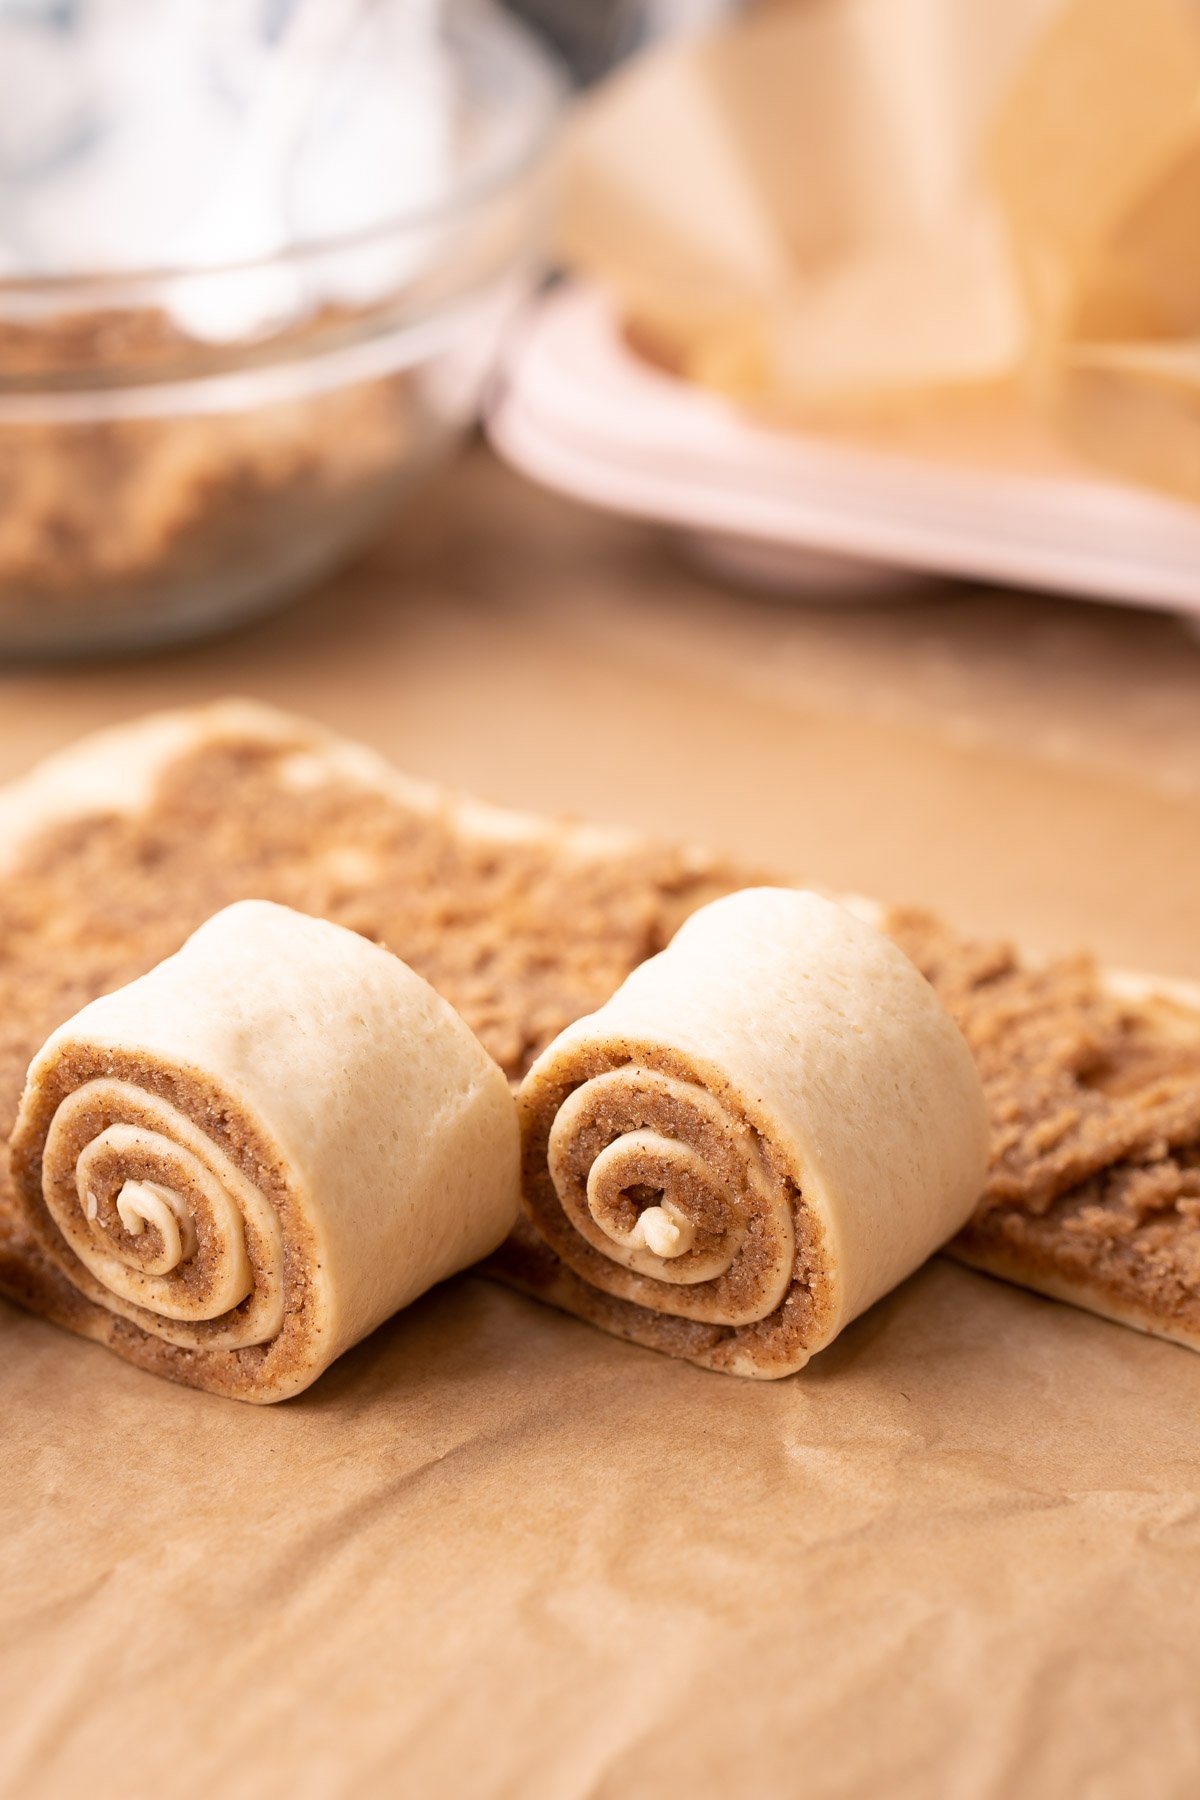 Cinnamon rolls being rolled up.